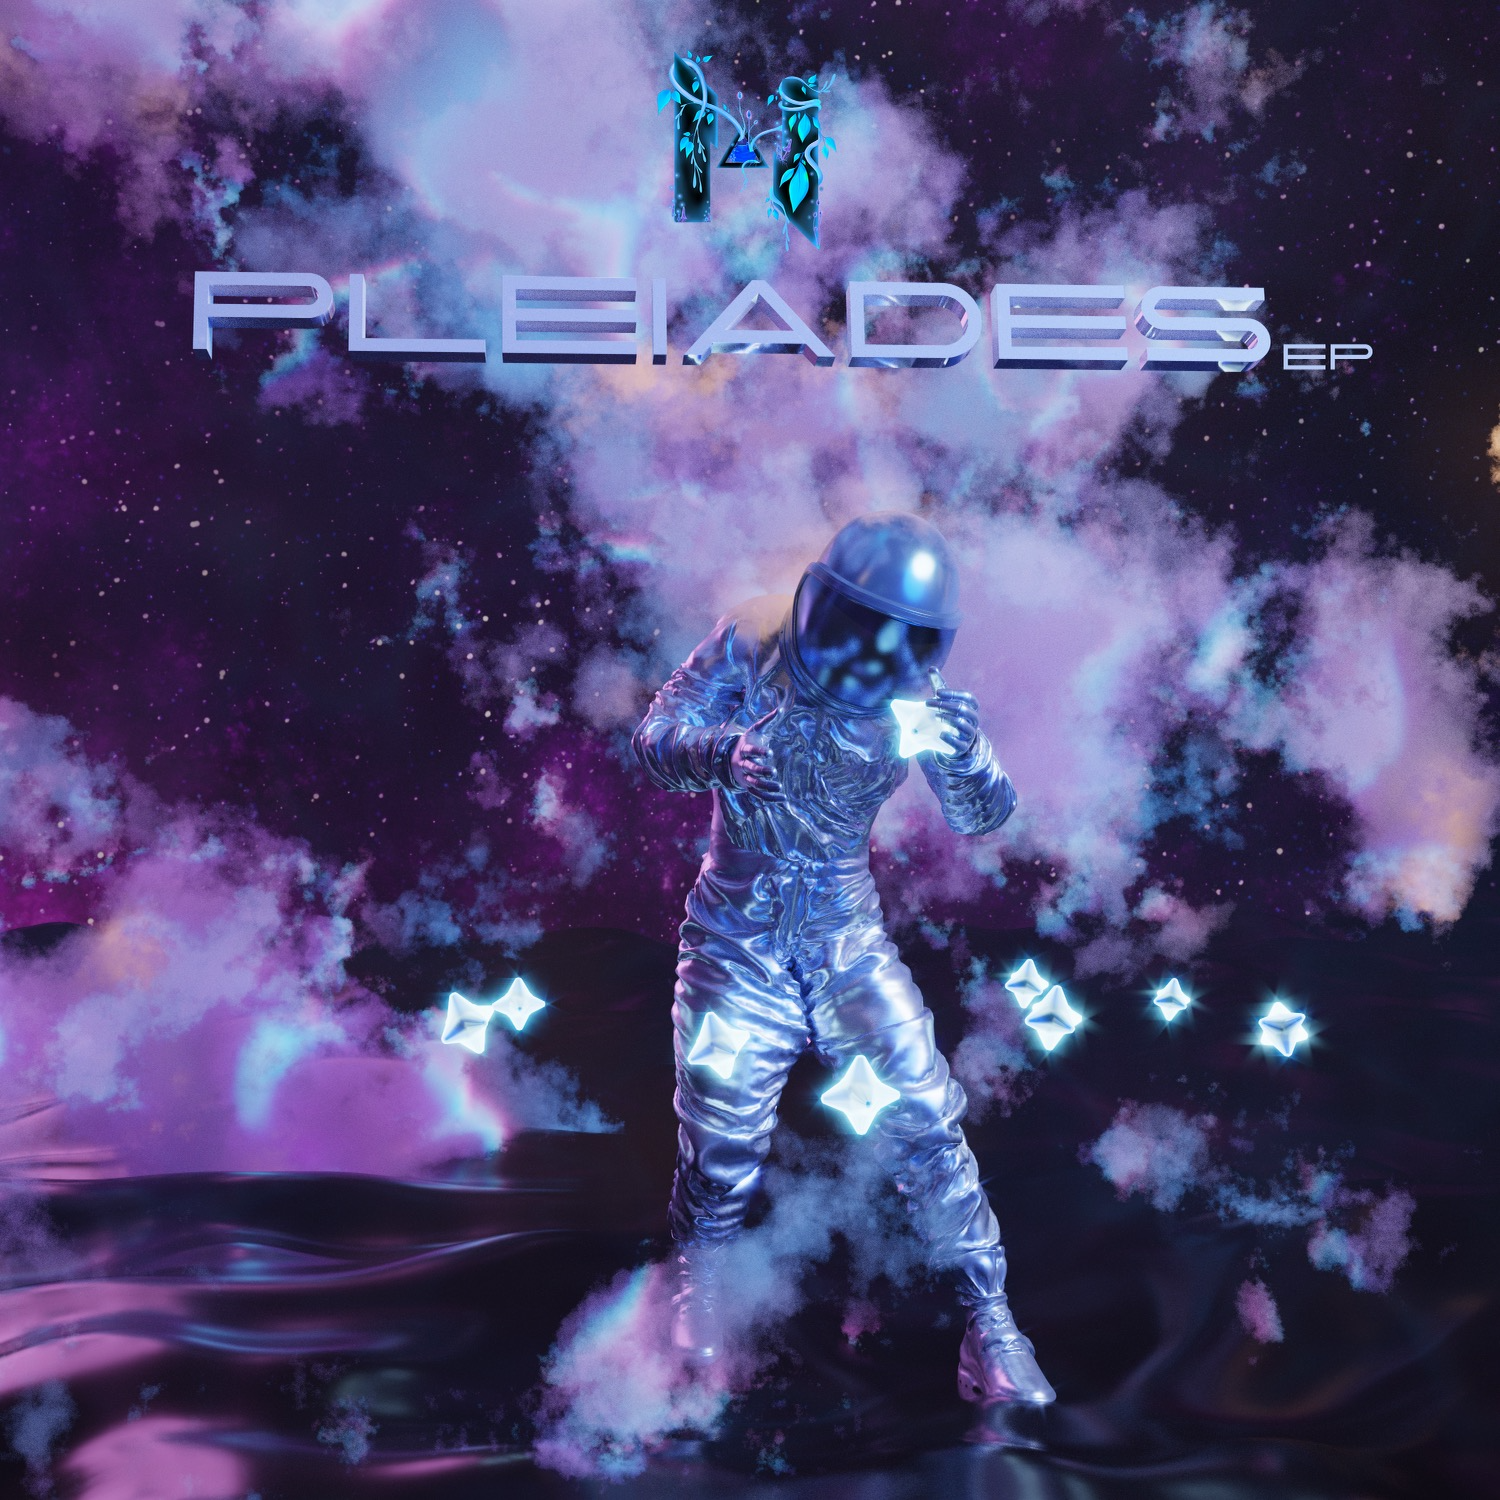 N3WPORT Continues To Break Out With 3rd EP Titled ‘Pleiades’